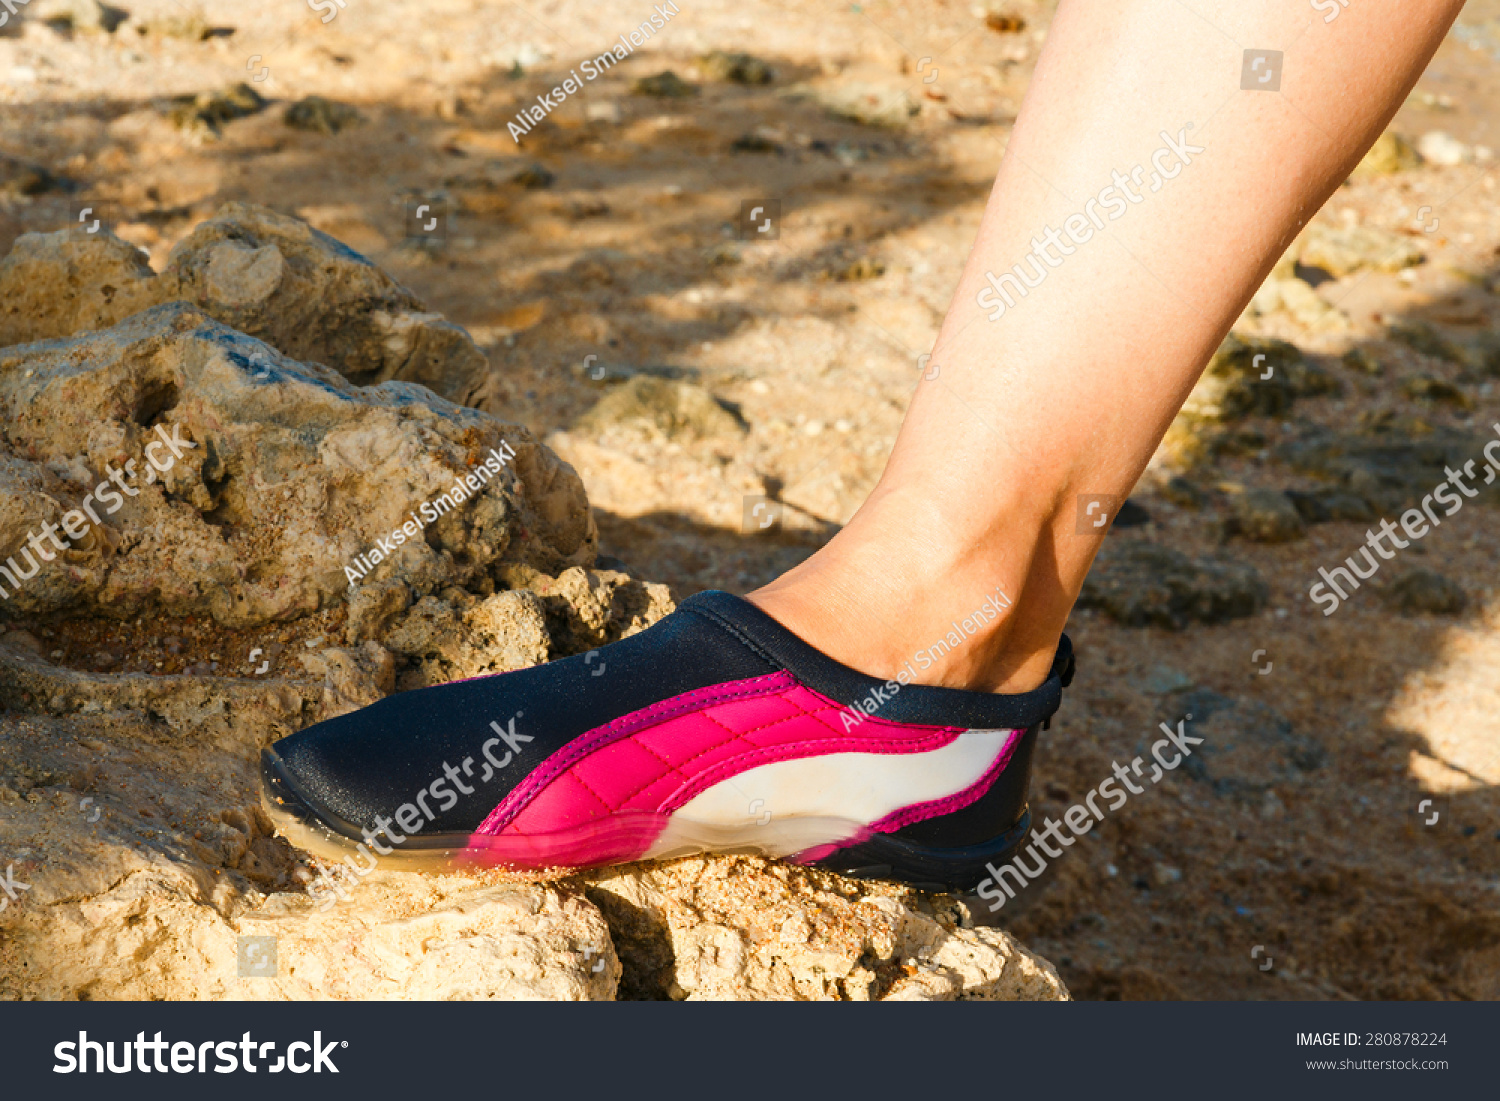 shoes for swimming on rocks